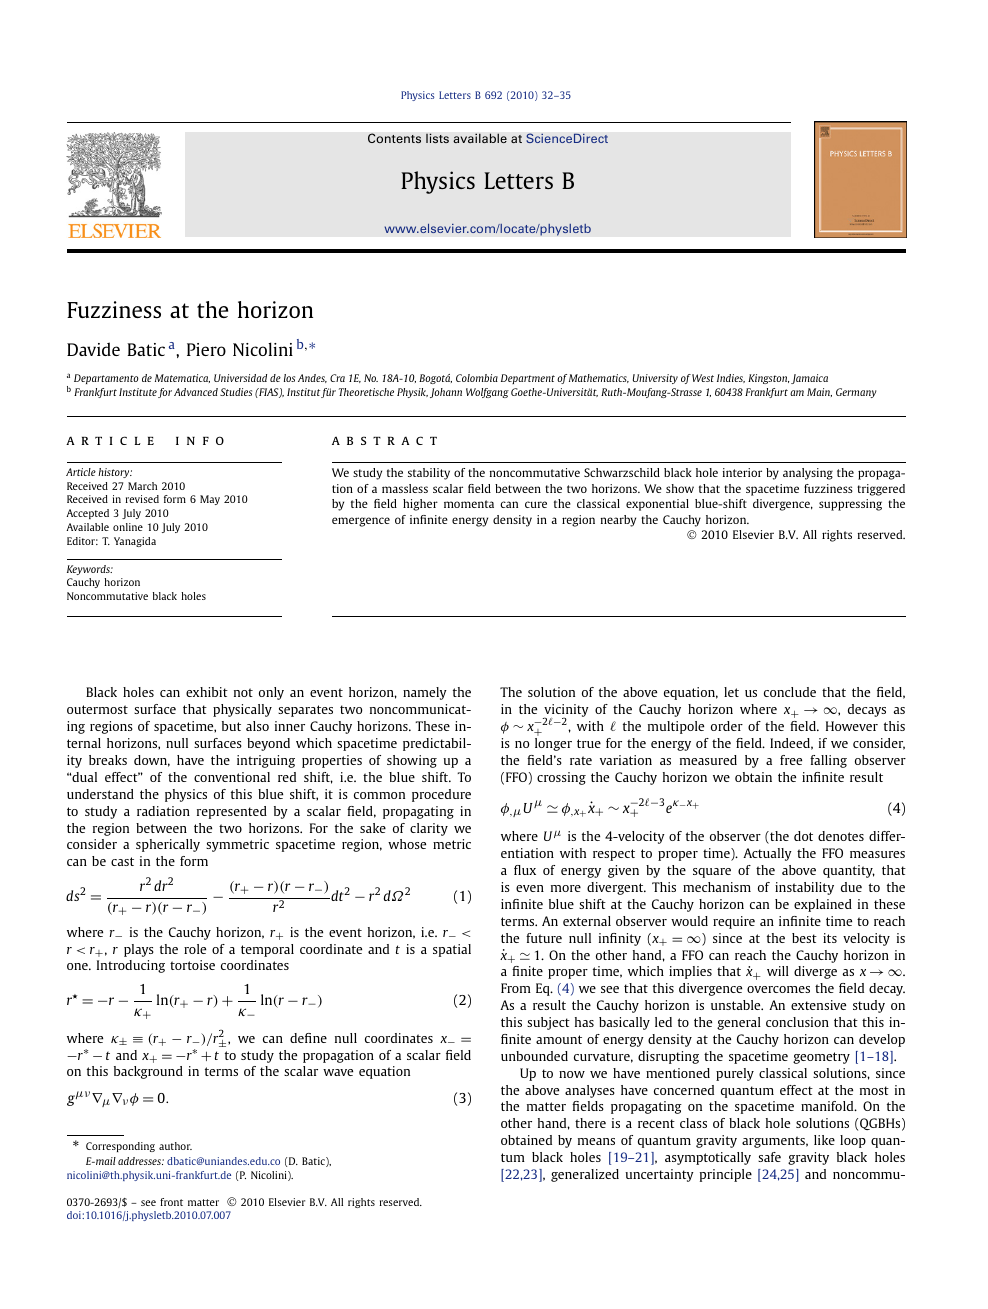 Fuzziness At The Horizon Topic Of Research Paper In Physical Sciences Download Scholarly Article Pdf And Read For Free On Cyberleninka Open Science Hub